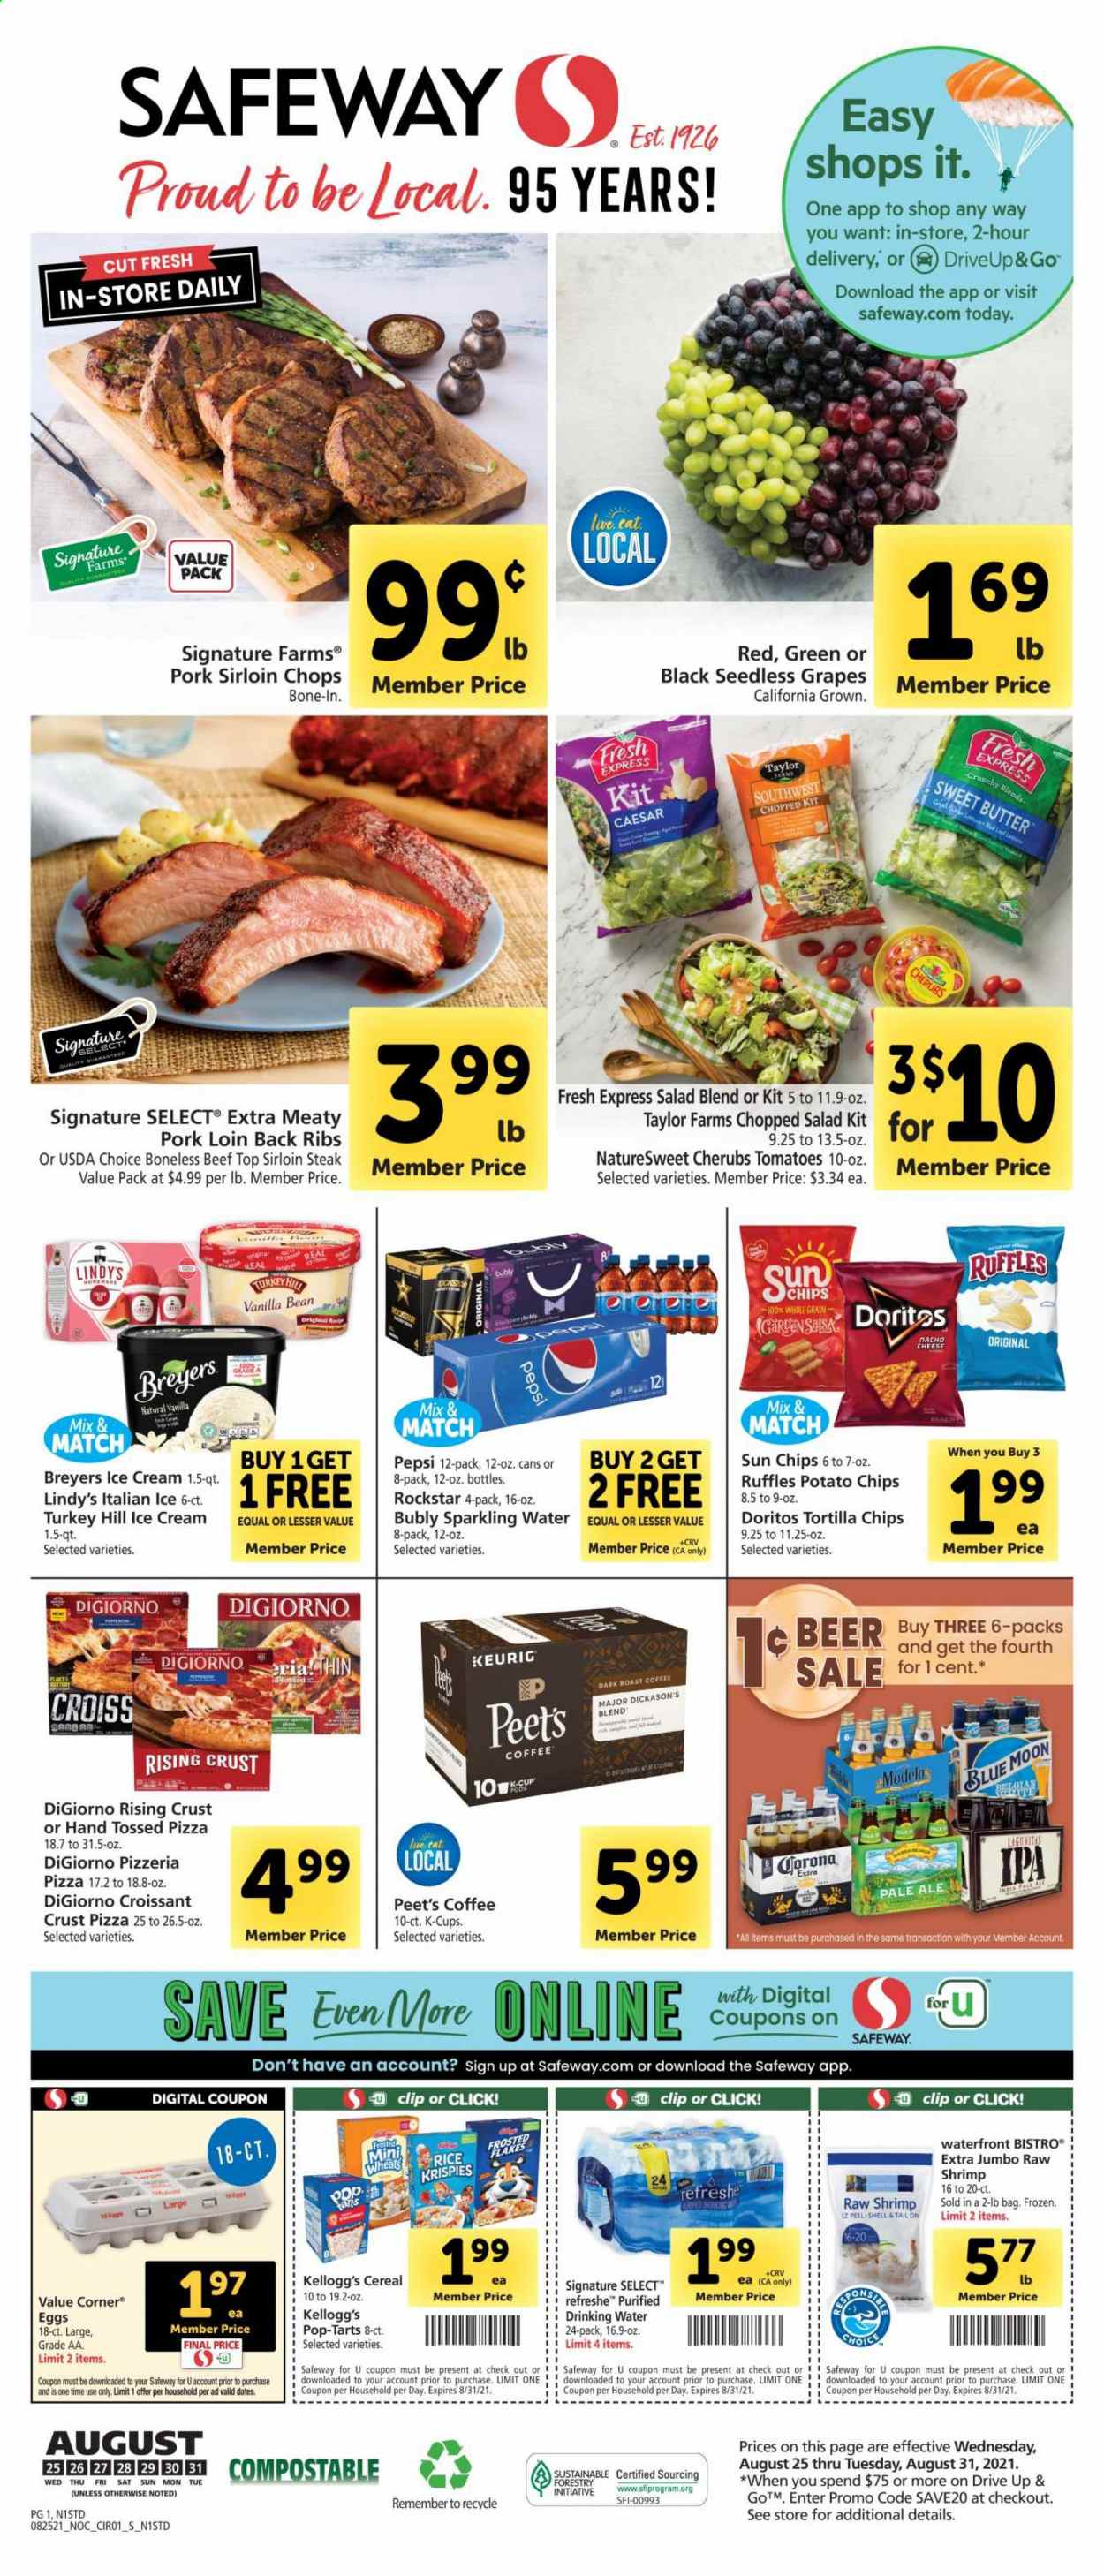 thumbnail - Safeway Flyer - 08/25/2021 - 08/31/2021 - Sales products - seedless grapes, croissant, salad, chopped salad, grapes, beef sirloin, steak, sirloin steak, pork loin, pork meat, shrimps, pizza, eggs, butter, ice cream, Kellogg's, Pop-Tarts, Doritos, tortilla chips, potato chips, Ruffles, cereals, Rice Krispies, Frosted Flakes, Pepsi, Rockstar, sparkling water, coffee, coffee capsules, K-Cups, Keurig, beer, Corona Extra, IPA, Modelo, Blue Moon. Page 1.